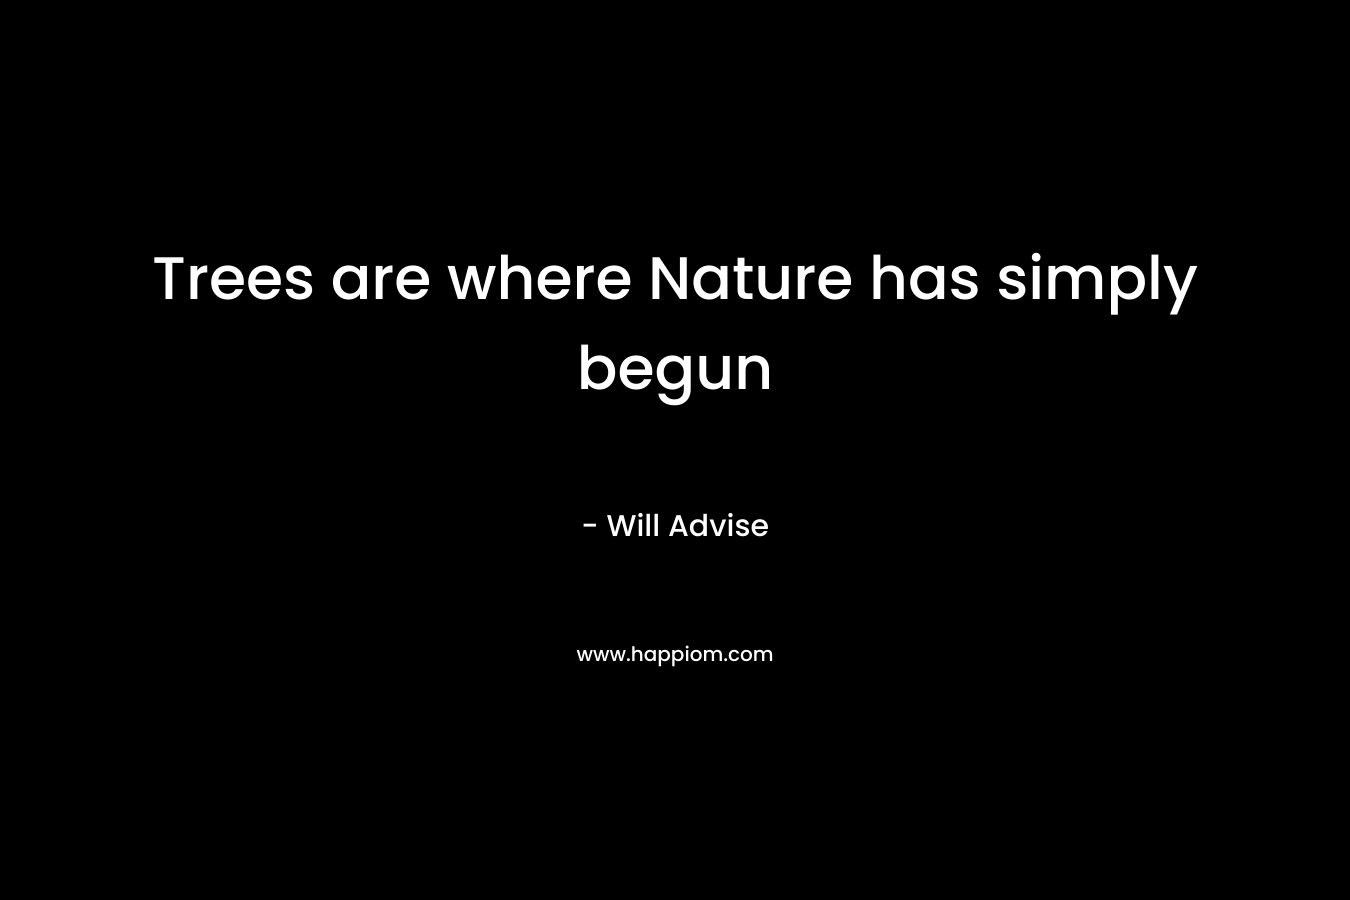 Trees are where Nature has simply begun